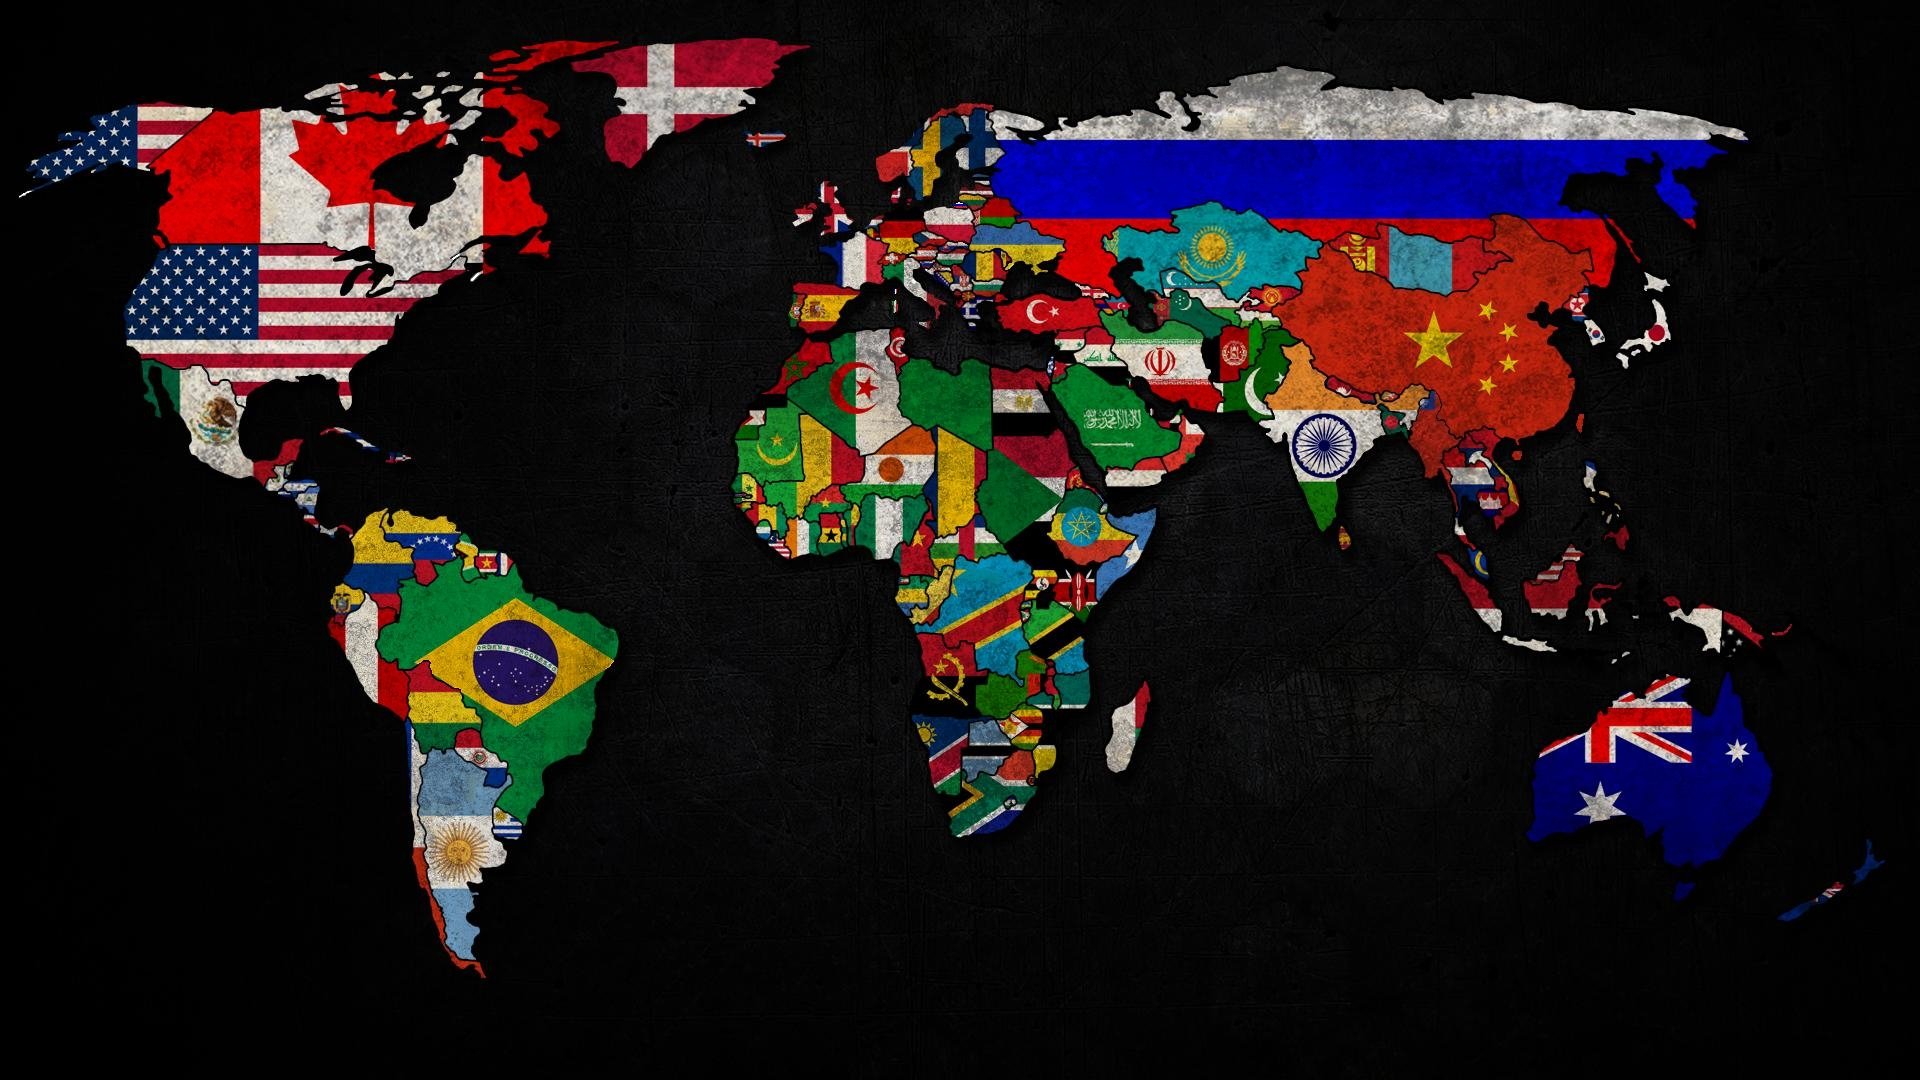 World Map With Flags - HD Wallpaper 